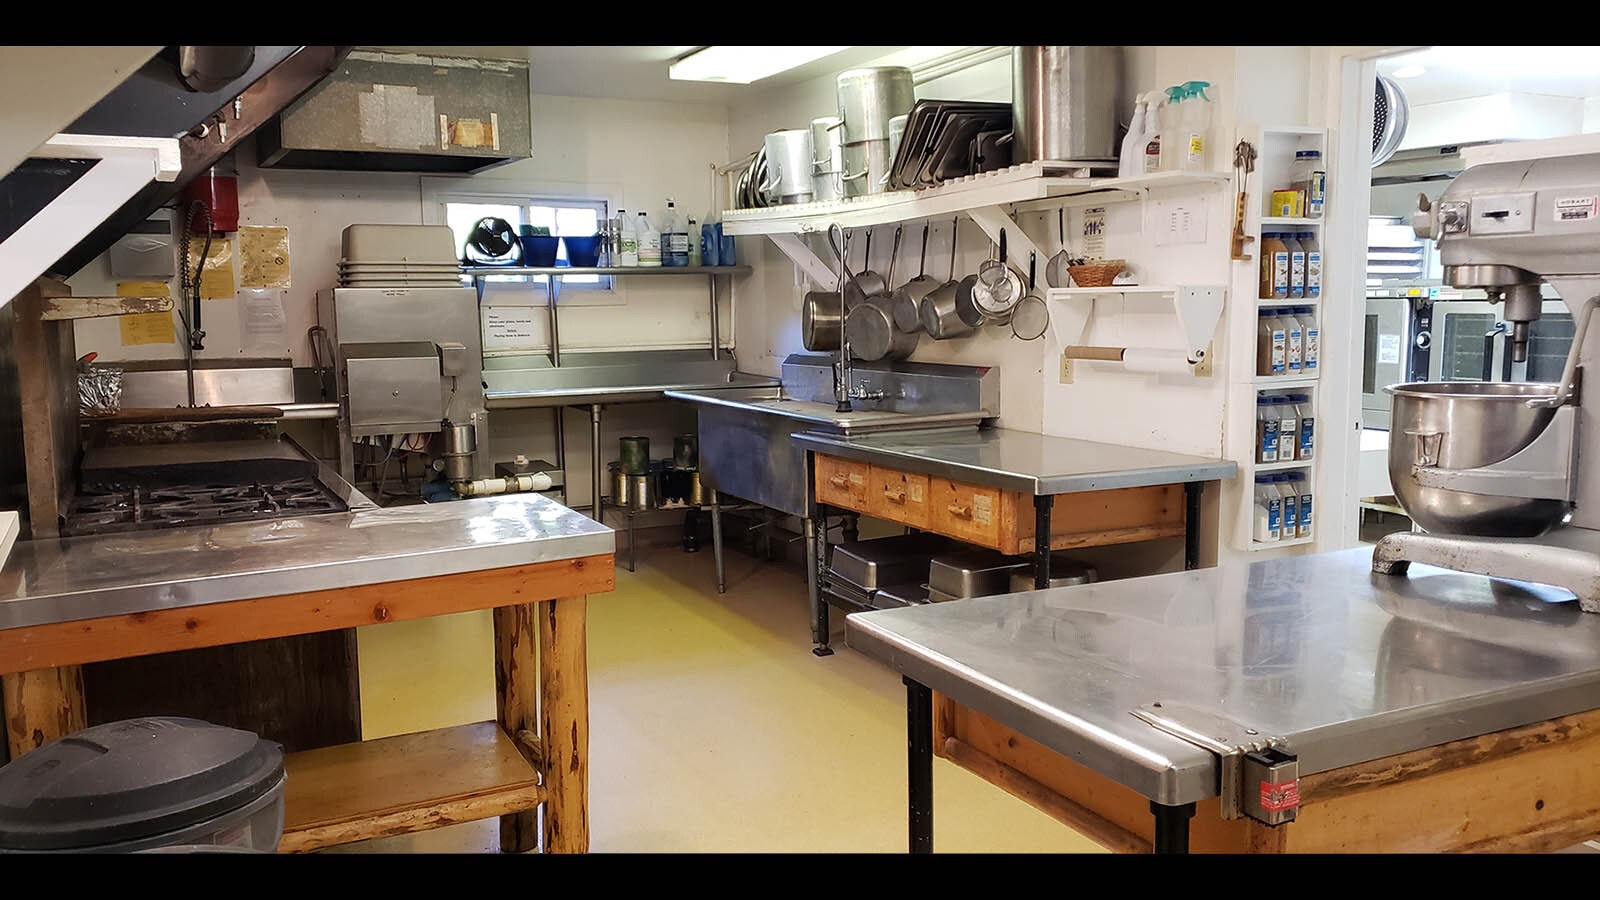 Granite Creek Ranch includes a complete commercial kitchen capable of serving up to 100 guests.